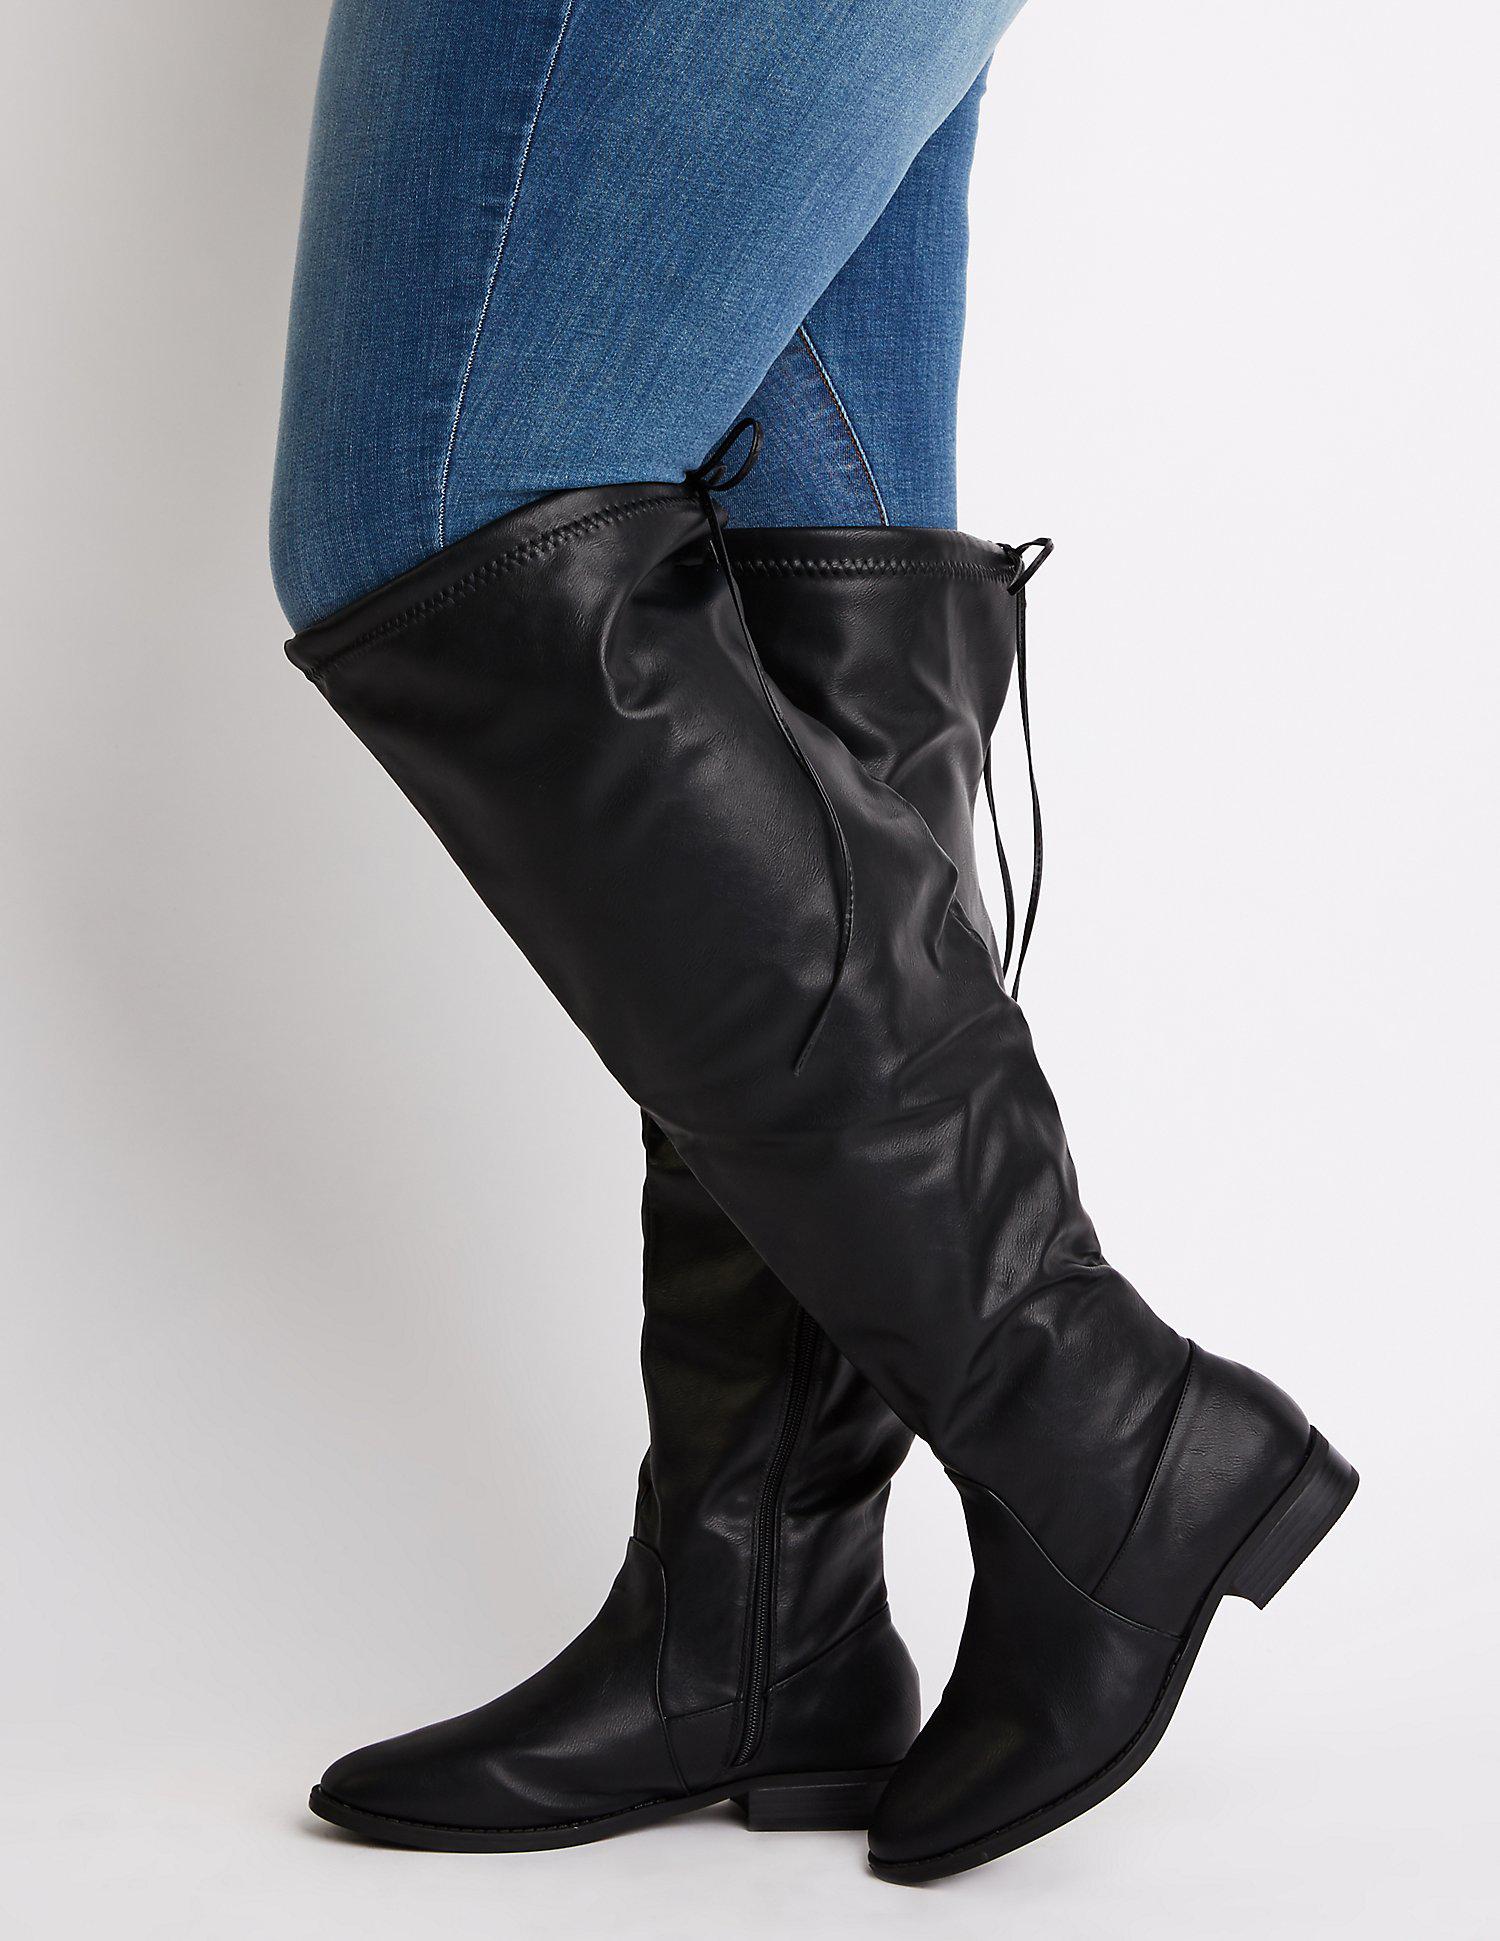 Lyst - Charlotte Russe Wide Width Over The Knee Riding Boots in Black ...